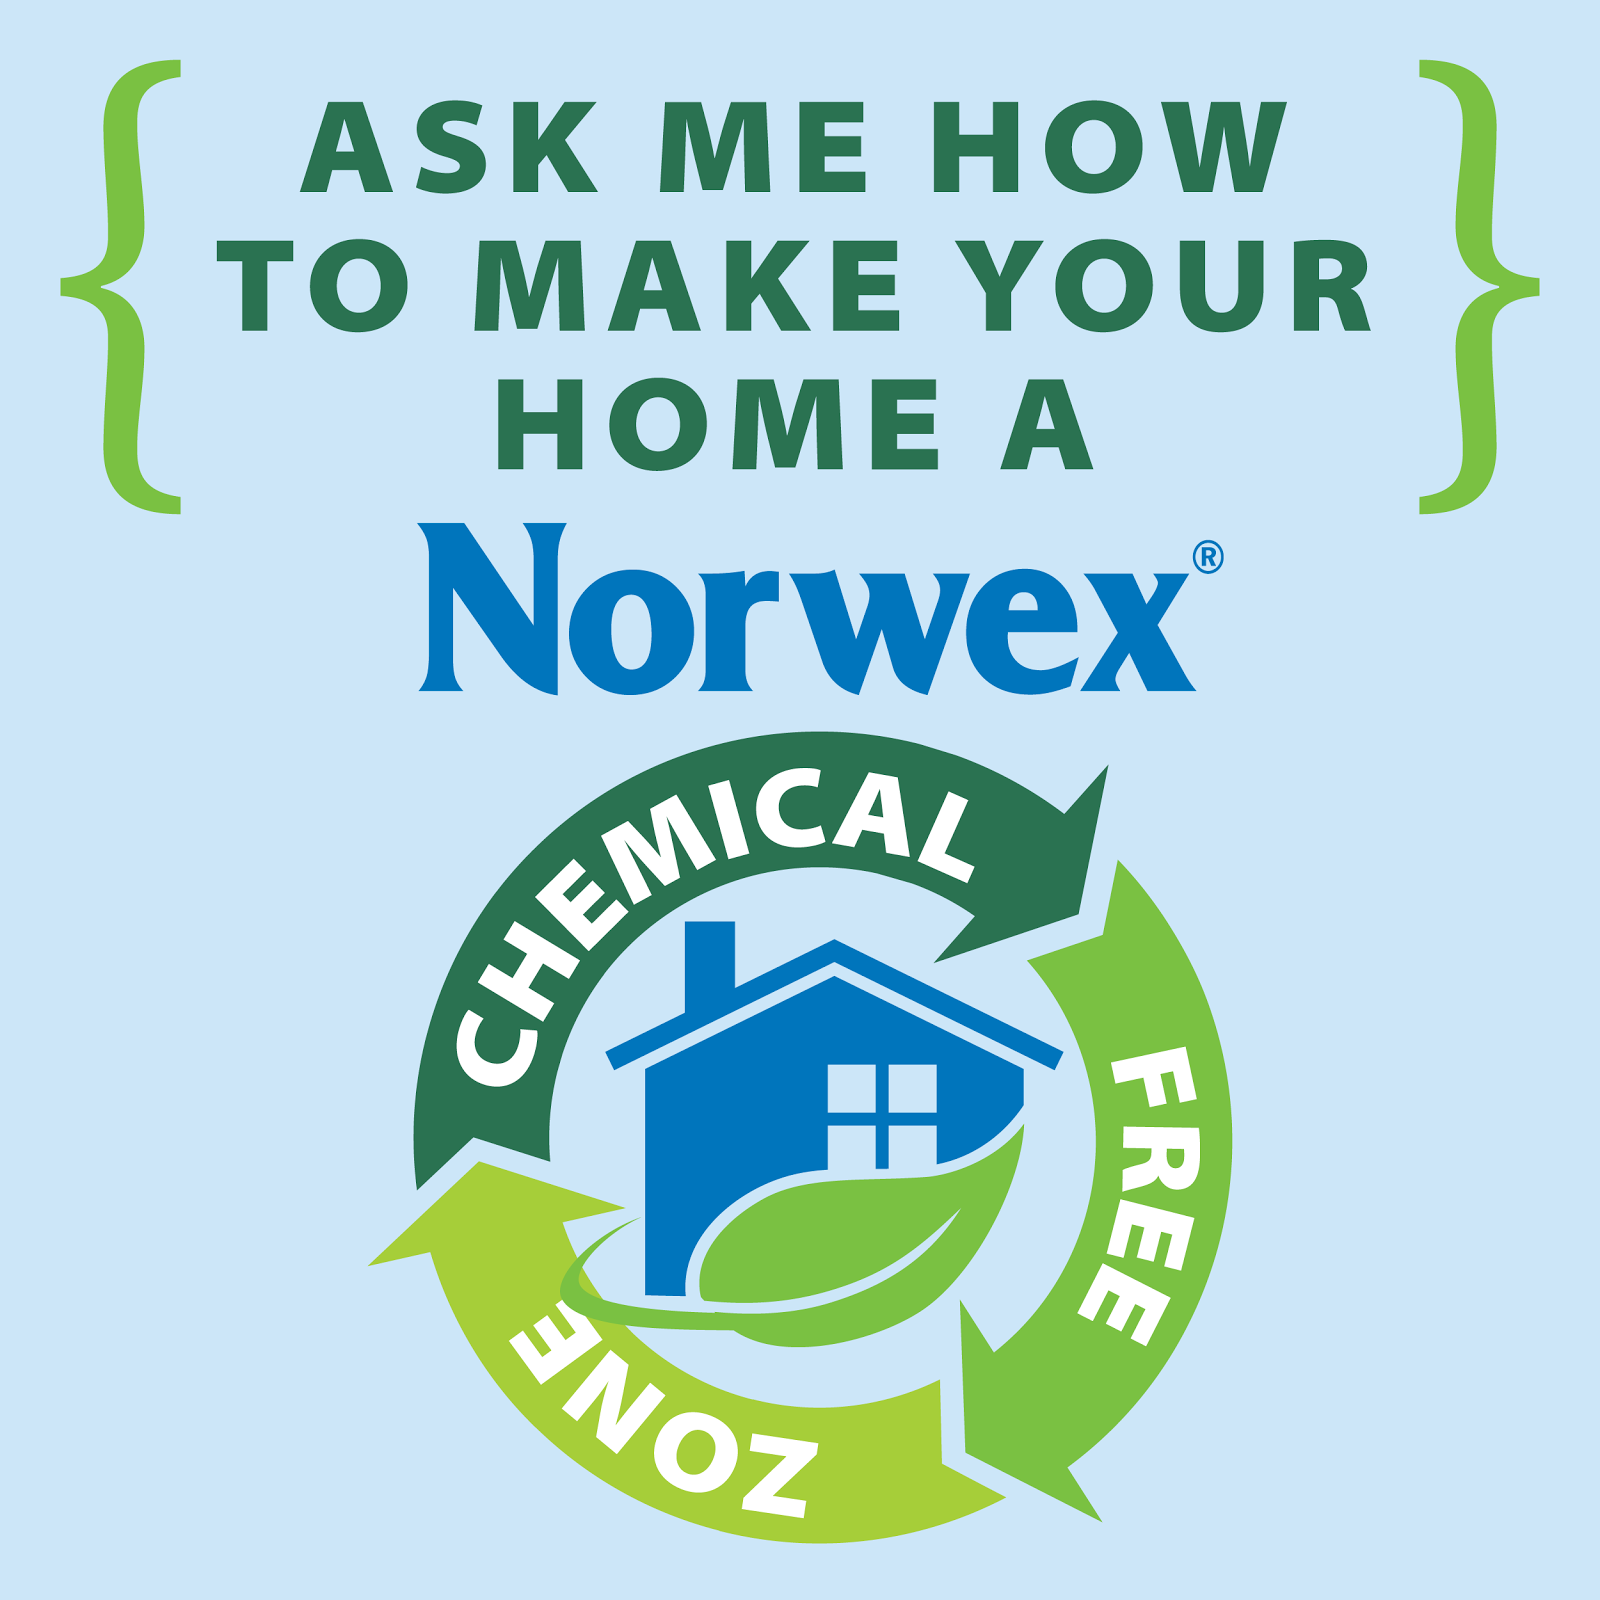 I'd love to tell you about Norwex!